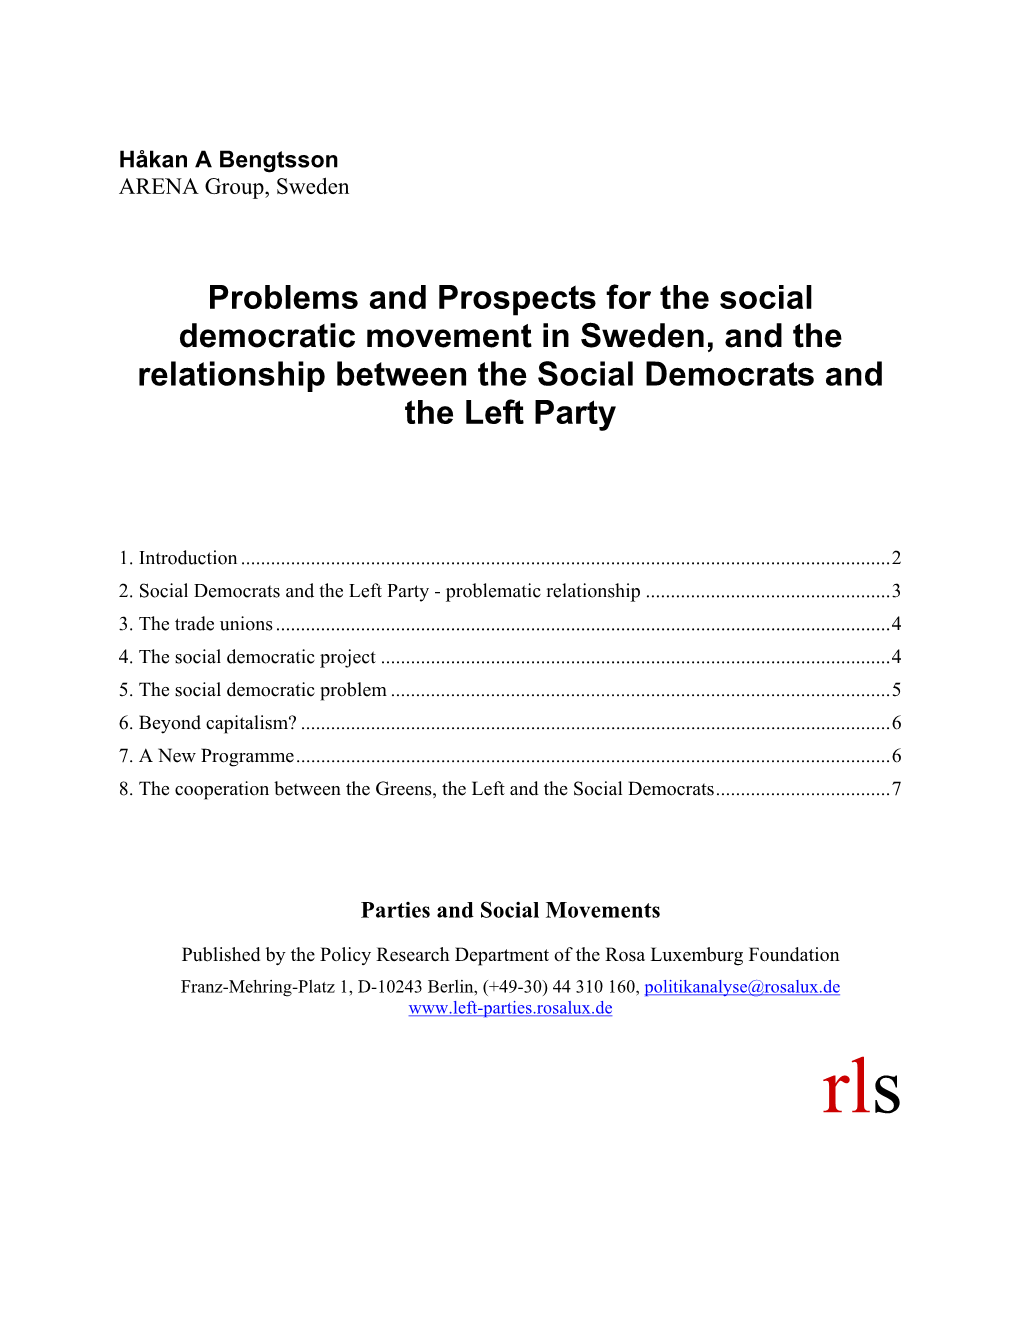 Problems and Prospects for the Social Democratic Movement in Sweden, and the Relationship Between the Social Democrats and the Left Party